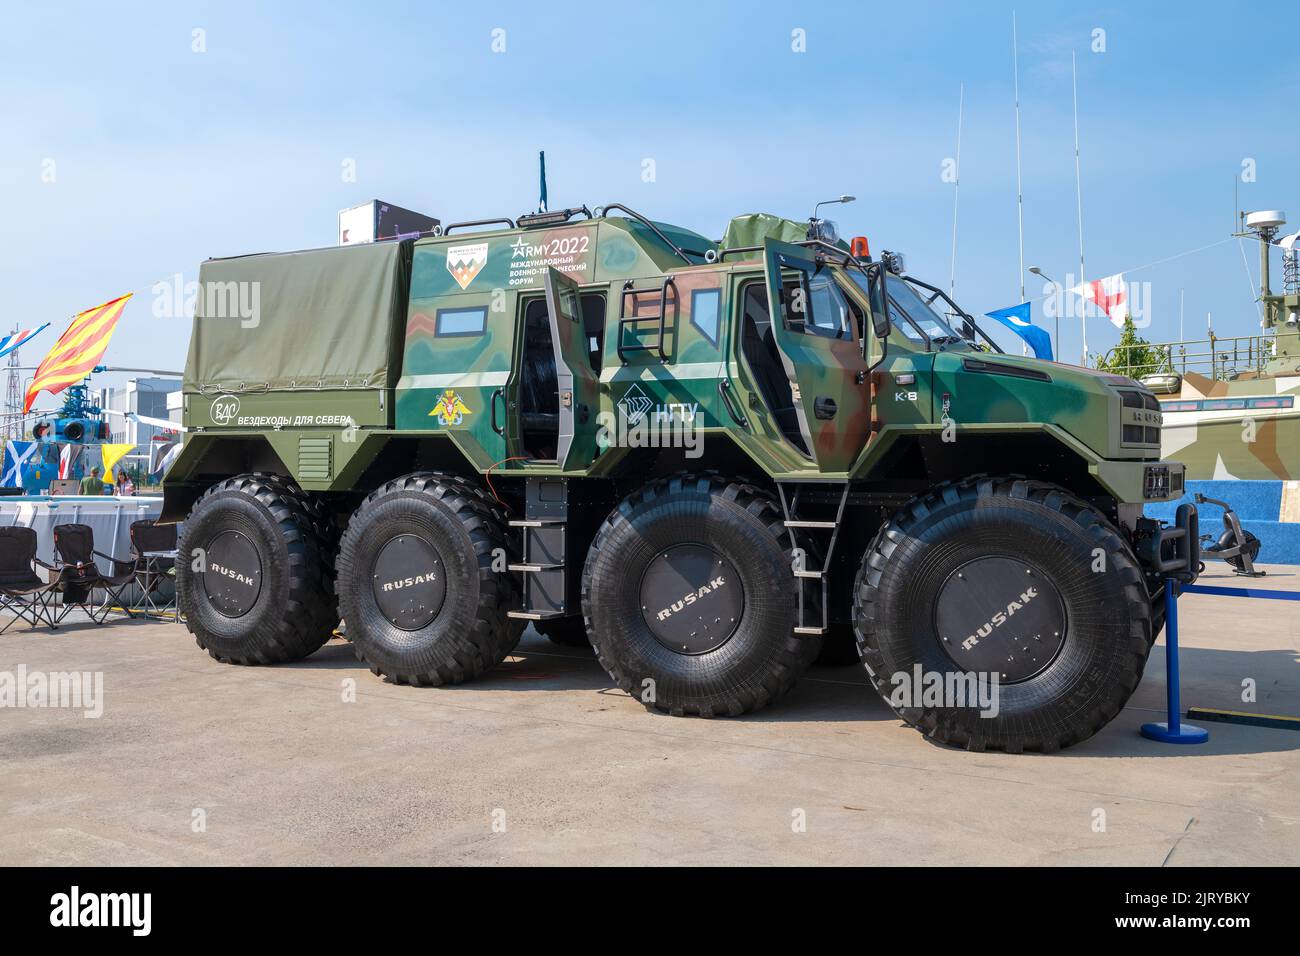 MOSCOW REGION, RUSSIA - AUGUST 18, 2022: Russian amphibious all-terrain vehicle on ultra-low pressure tires 'Rusak K-8' in the exposition of the inter Stock Photo